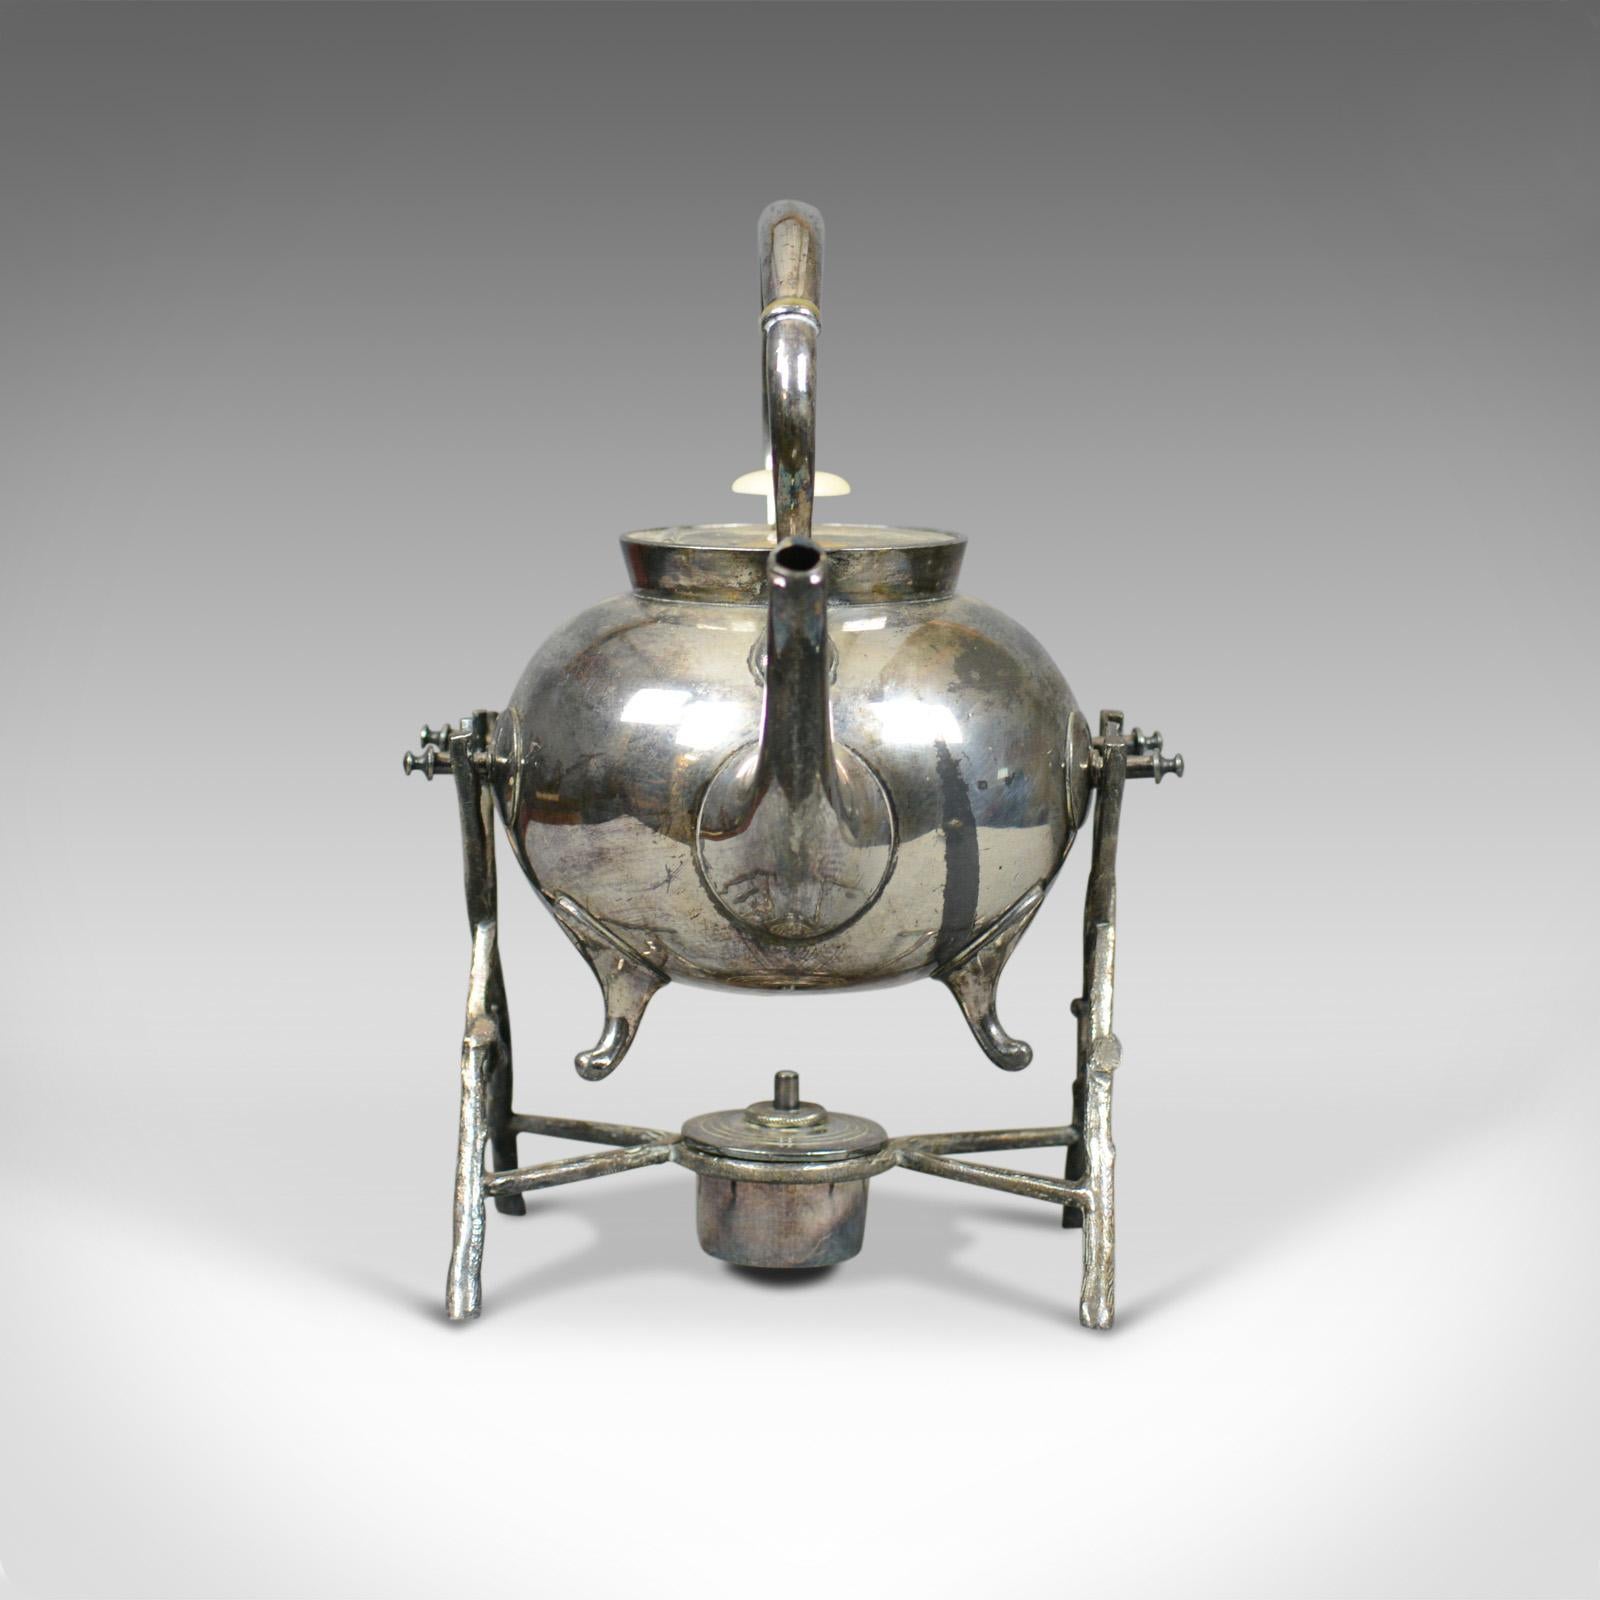 This is an antique spirit kettle on stand. A decorative silver plated tea pot on stand dating to the early 20th century.

An attractive spirit kettle on stand
Double fulcrum stand provides 'on stand' pouring
Beautifully crafted and